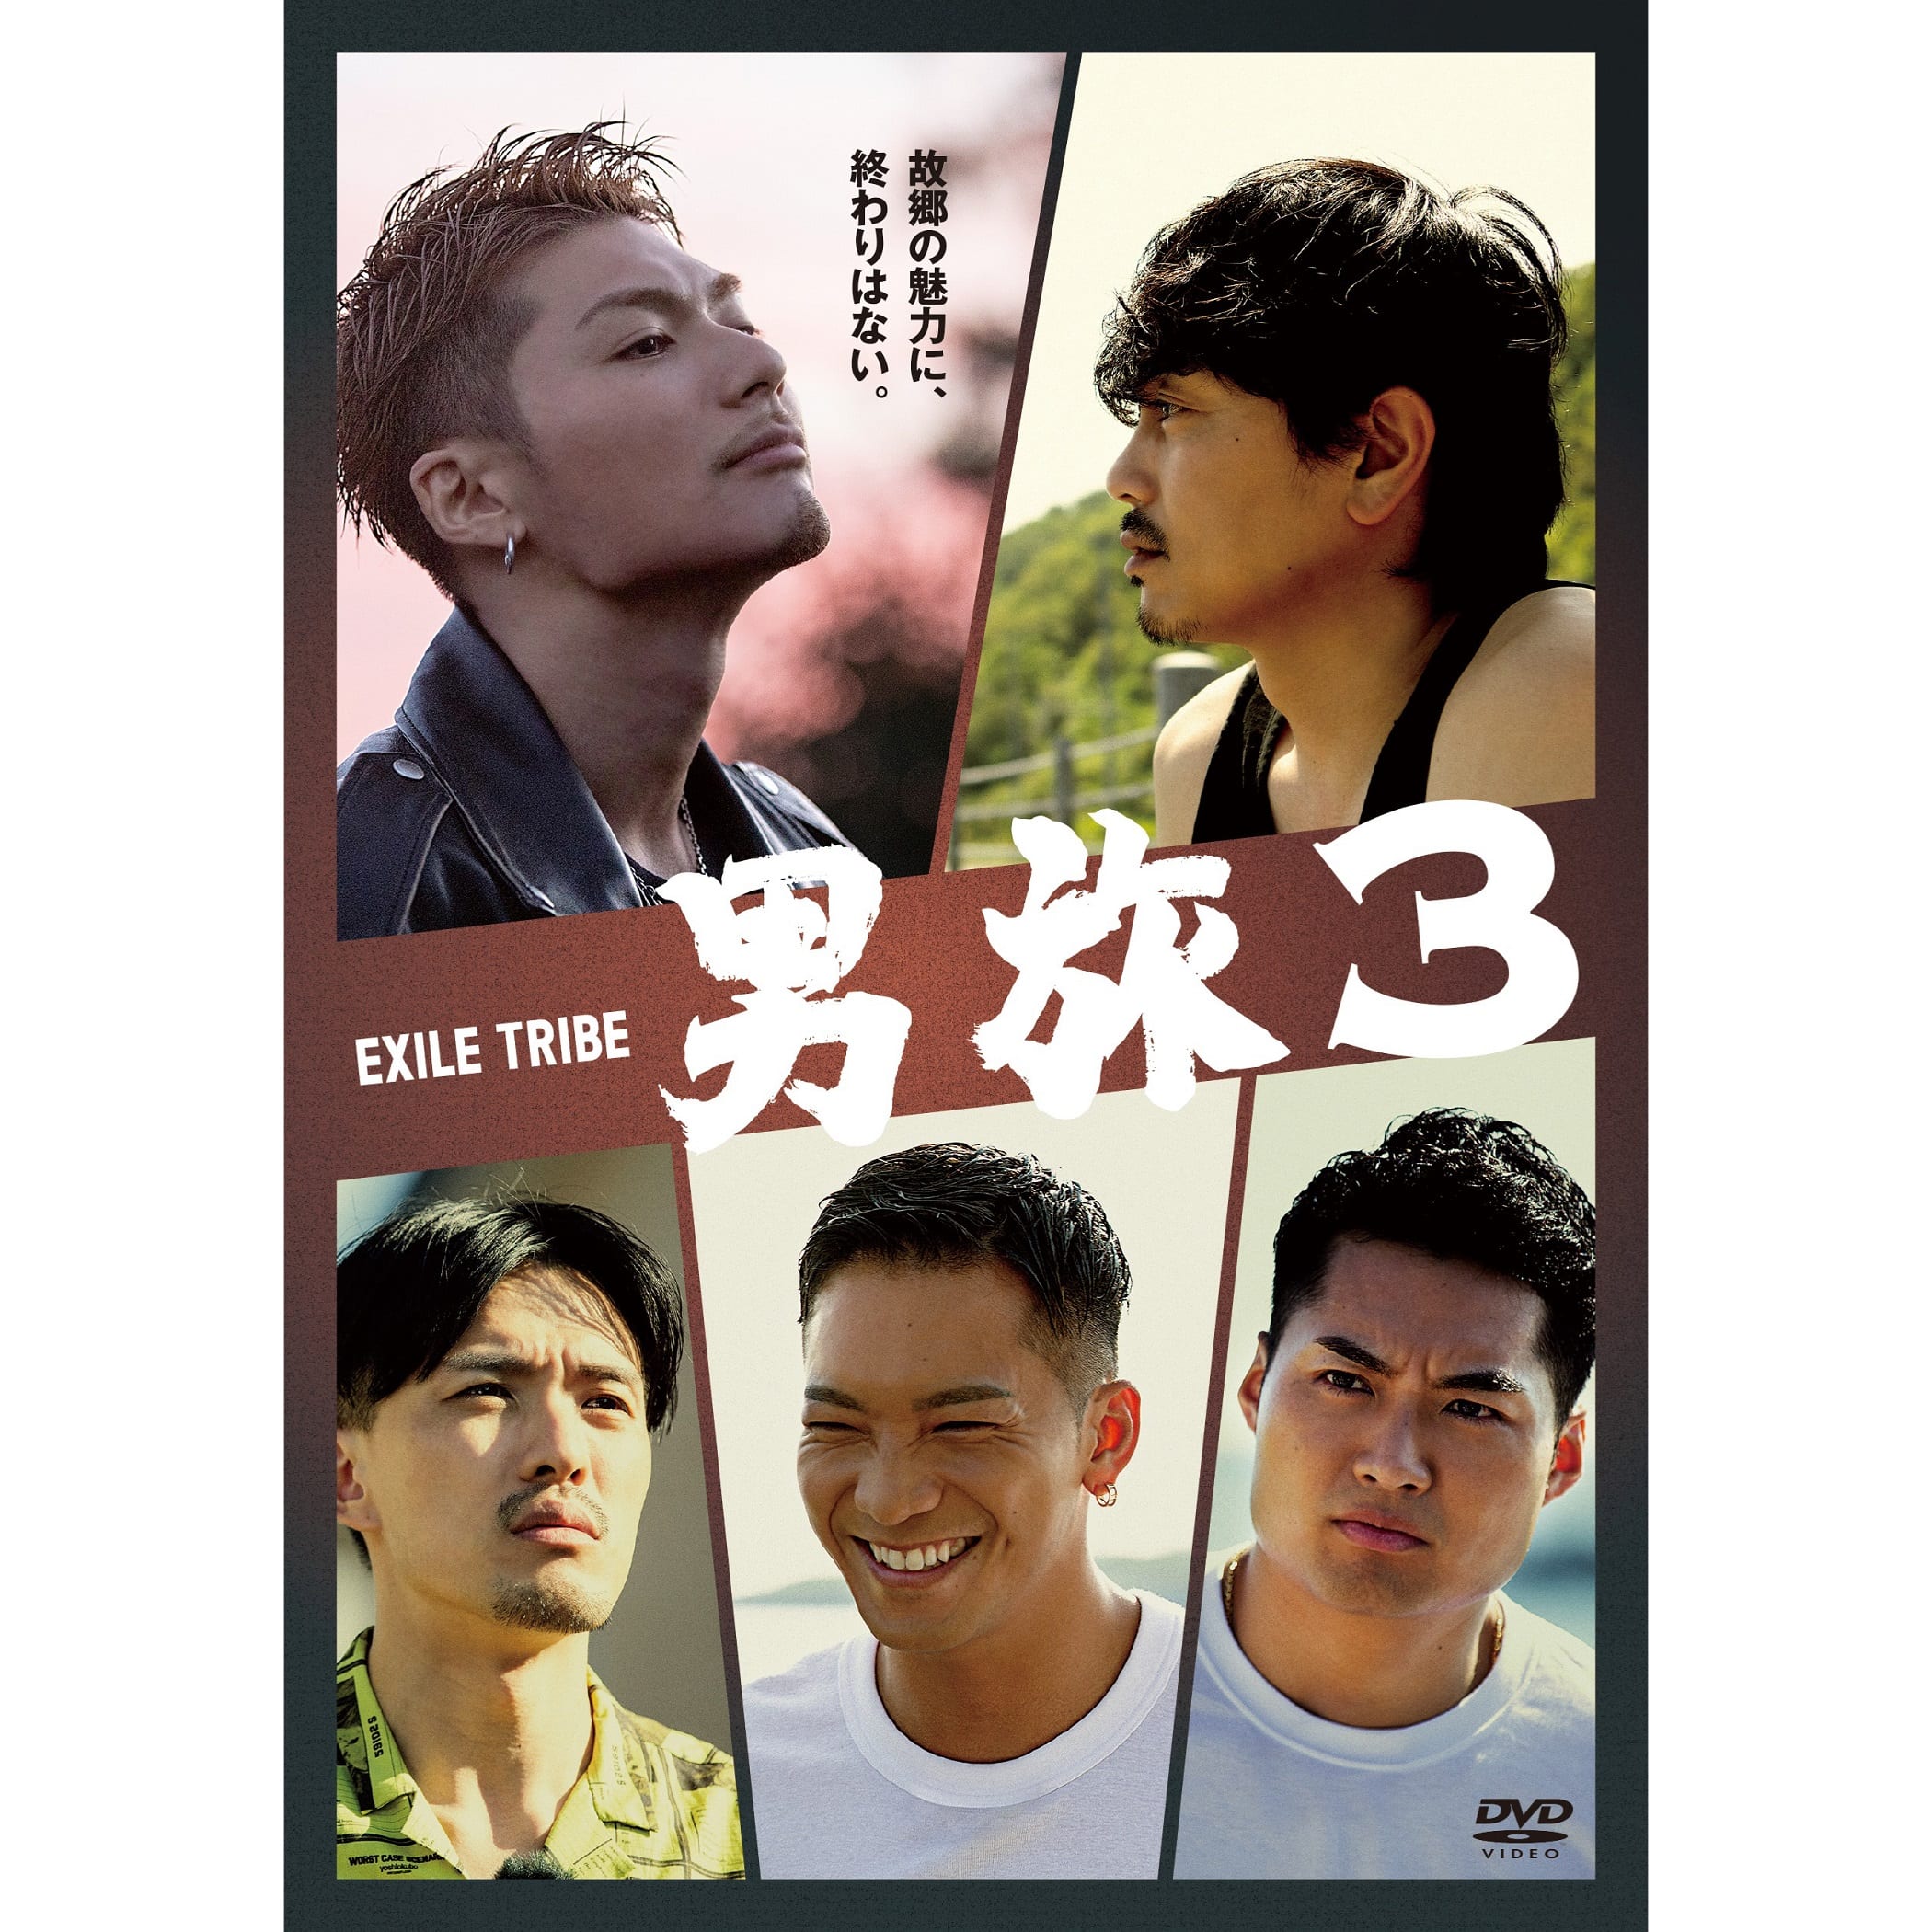 EXILE TRIBE STATION ONLINE STORE｜EXILE TRIBE 男旅3/EXILE SHOKICHI  初ソロツアーUNDERDOGG密着ドキュメント DVD